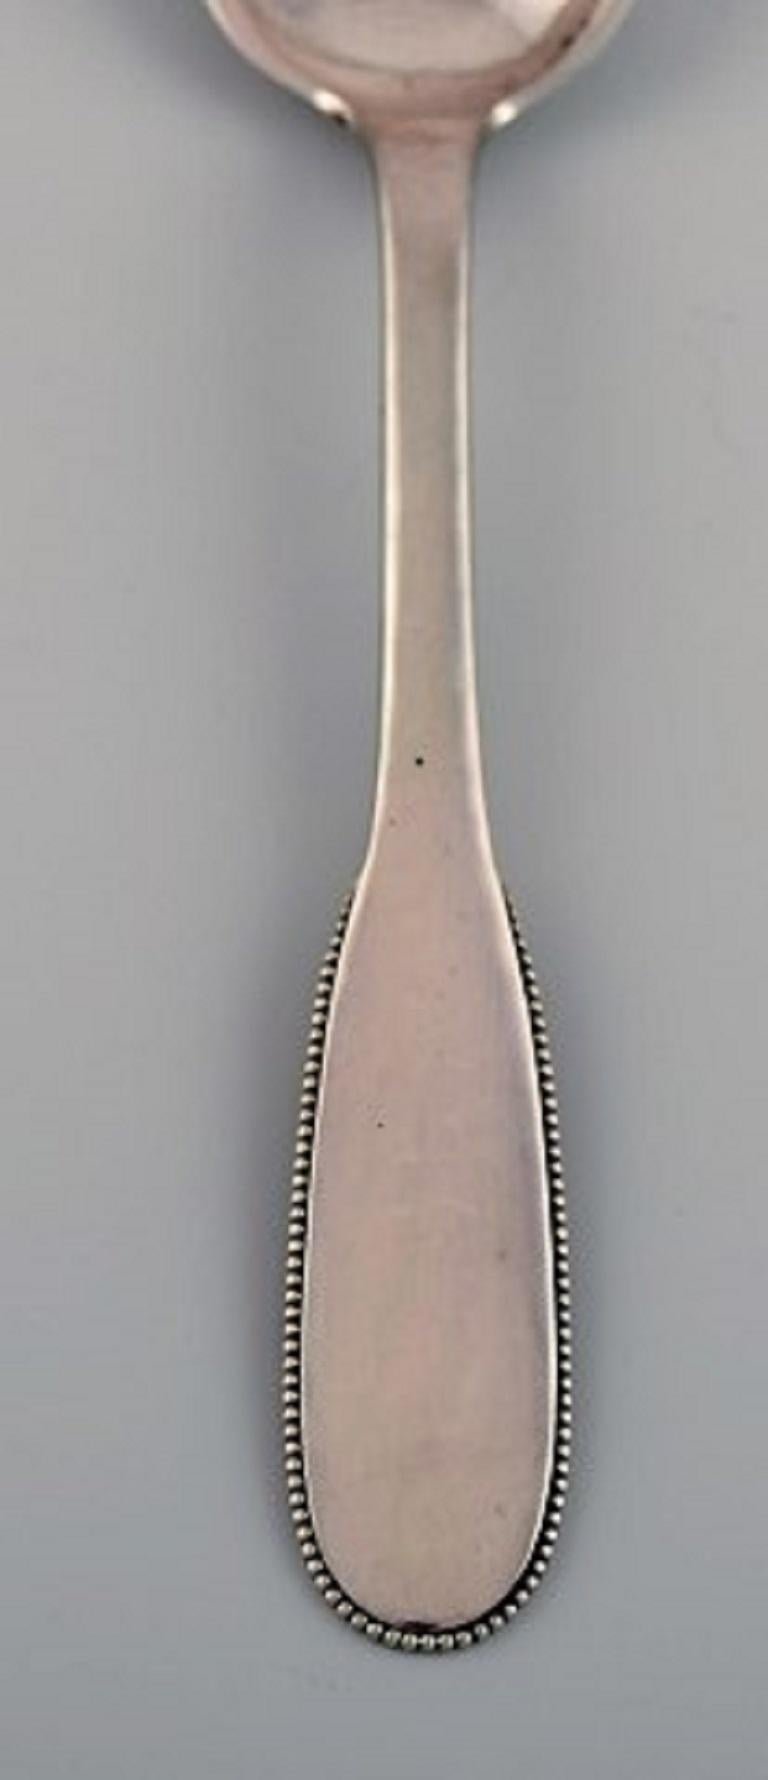 Evald Nielsen number 14 tablespoon in hammered silver, 1920s.
Measures: Length 18 cm.
Stamped.
In excellent condition.
Our skilled Georg Jensen silversmith / goldsmith can polish all silver and gold so that it looks like new. The price is very